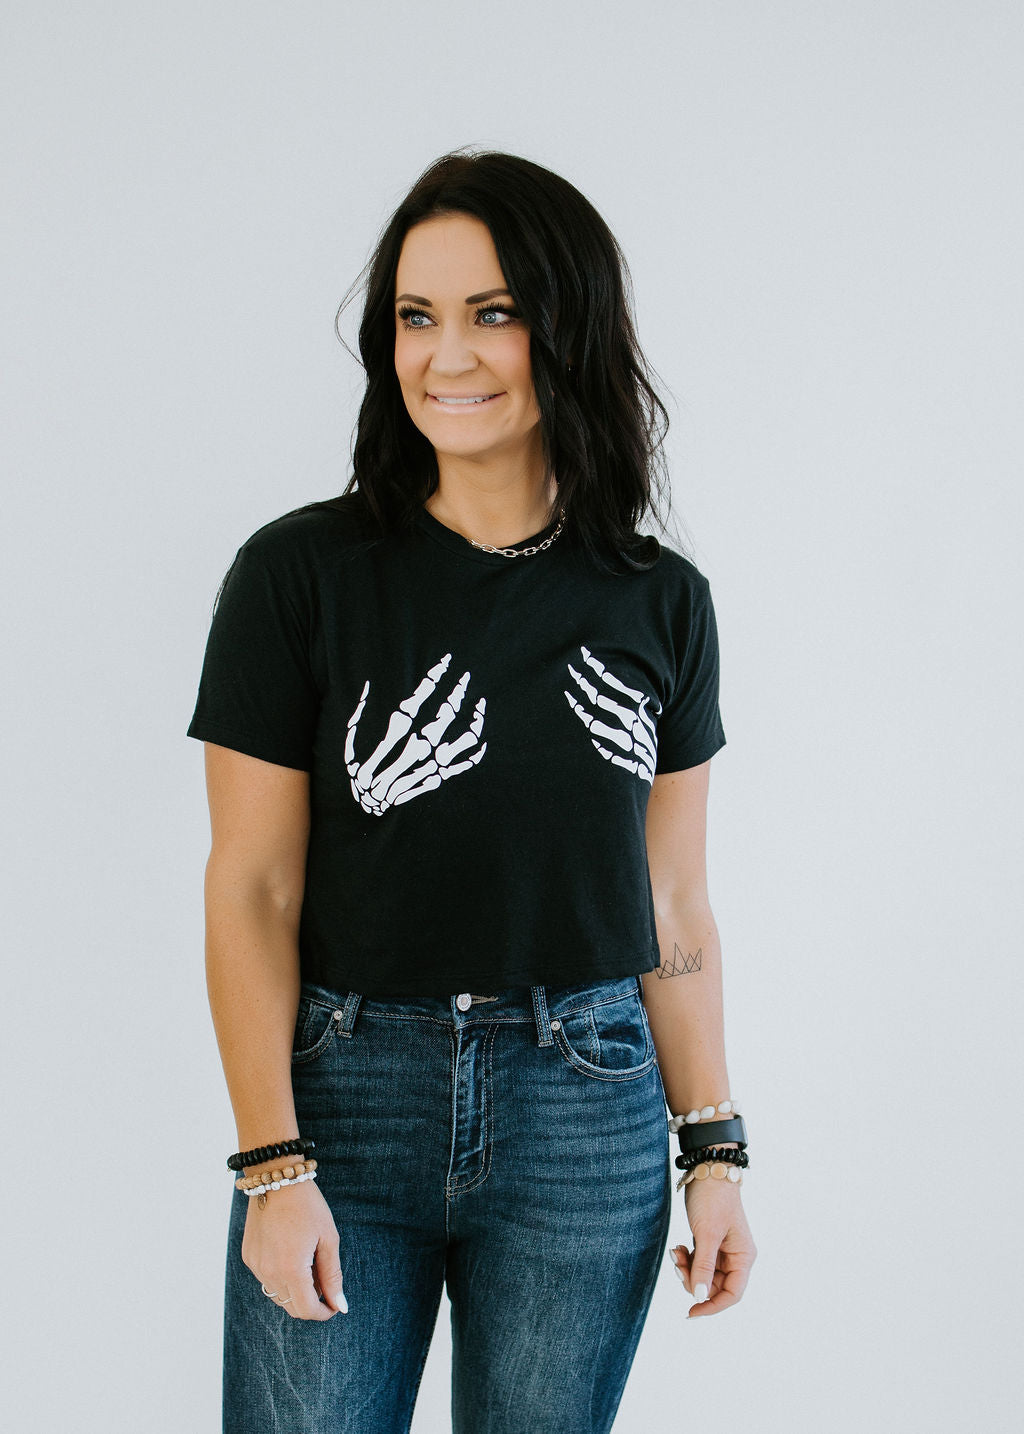 Skeleton Hands On Graphic Tee FINAL SALE